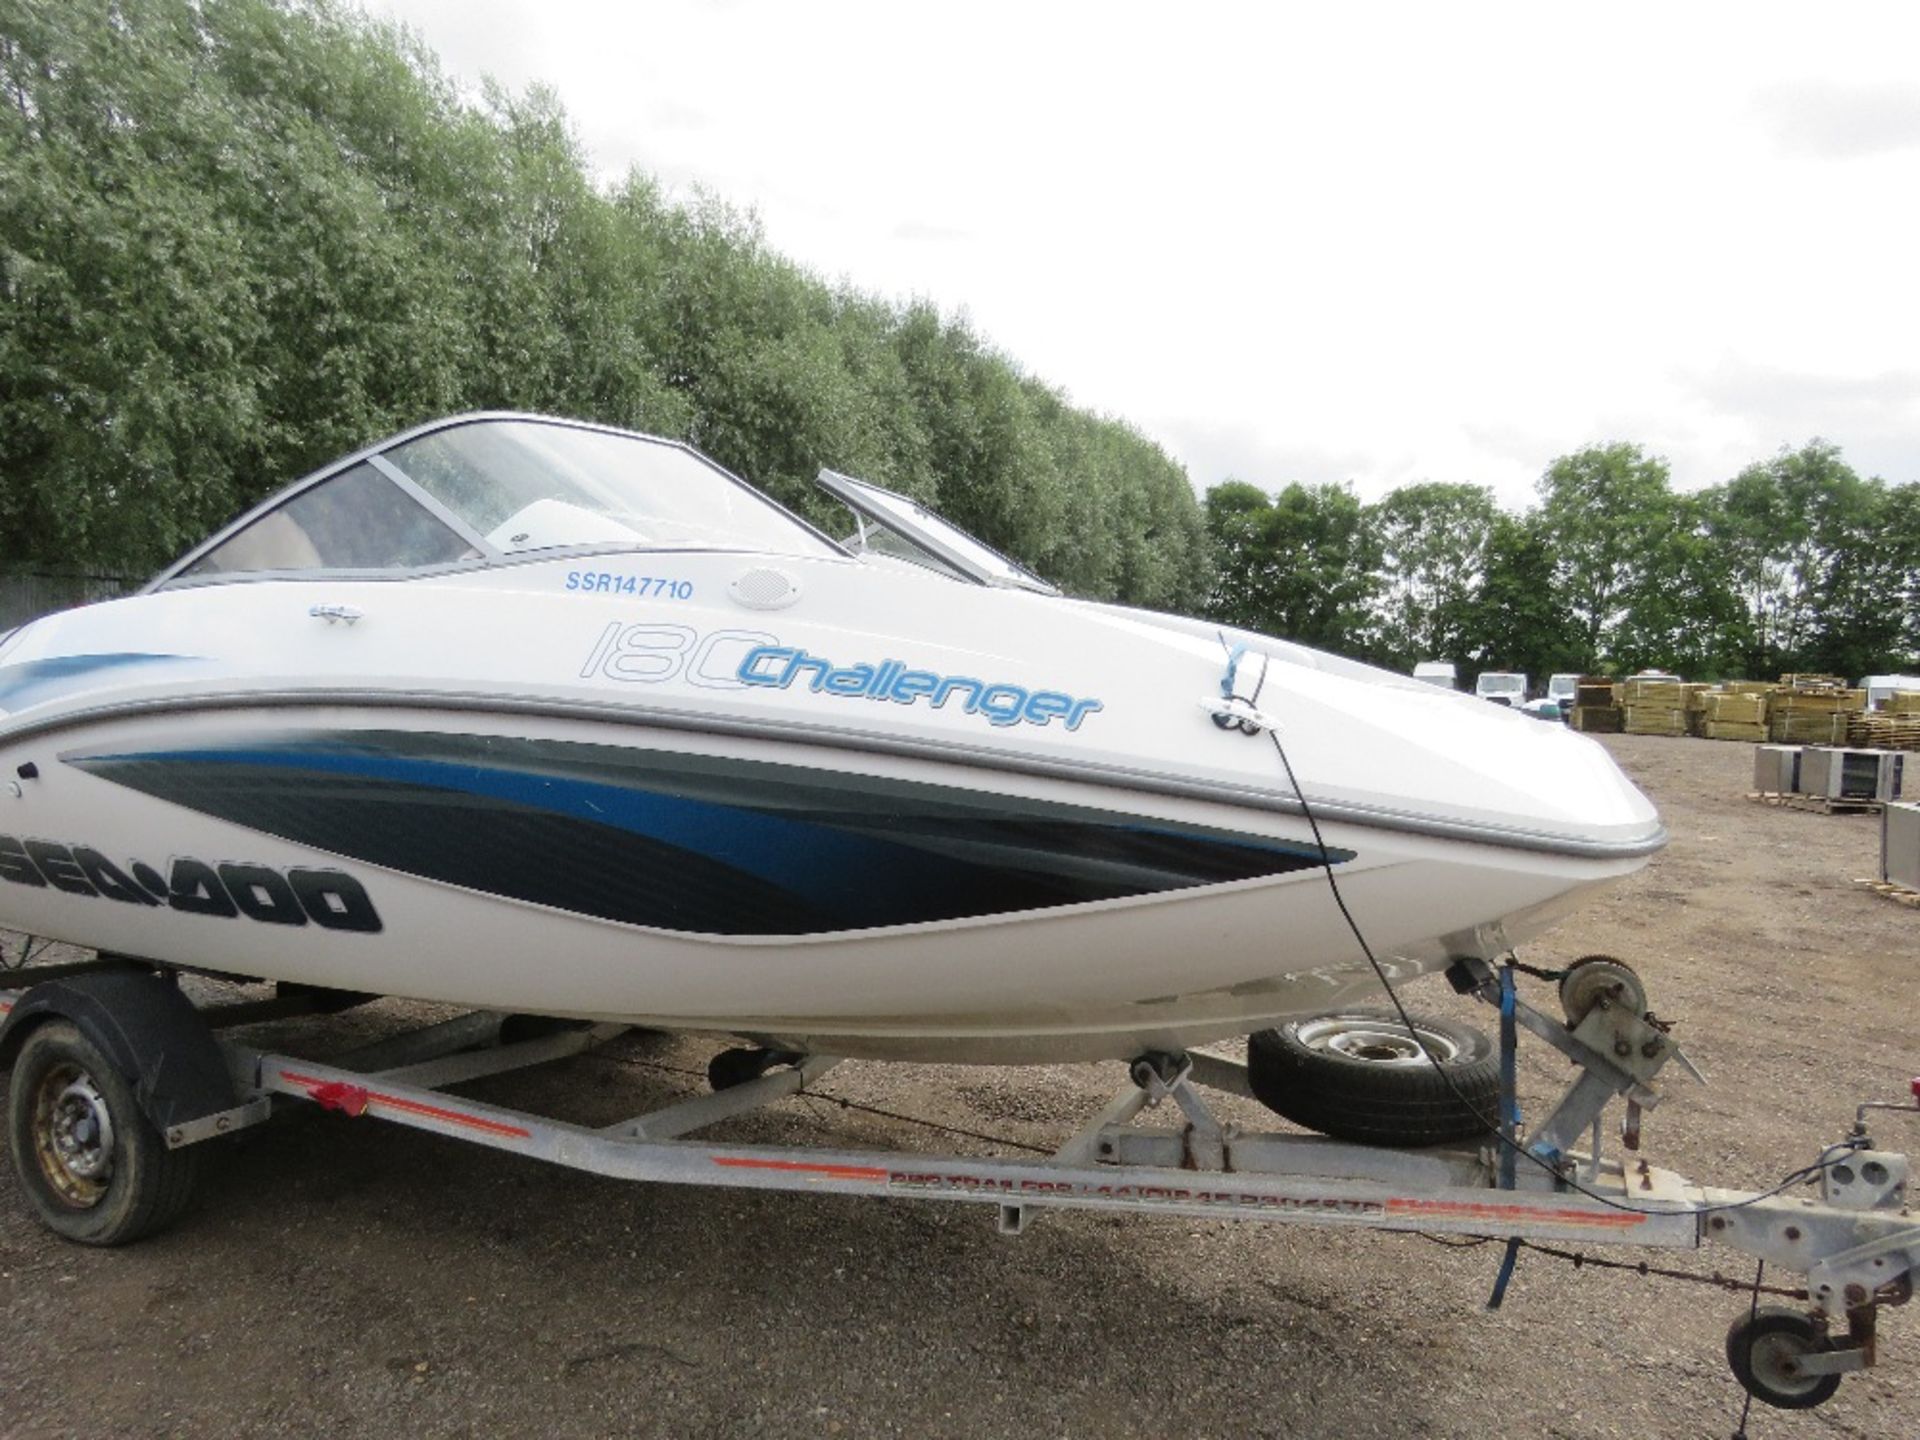 ON SALE!!!...SEADOO CHALLENGER 180 JET BOAT ON TRAILER. POWERED BY ROTAX 215HP 4-TEC ENGINE